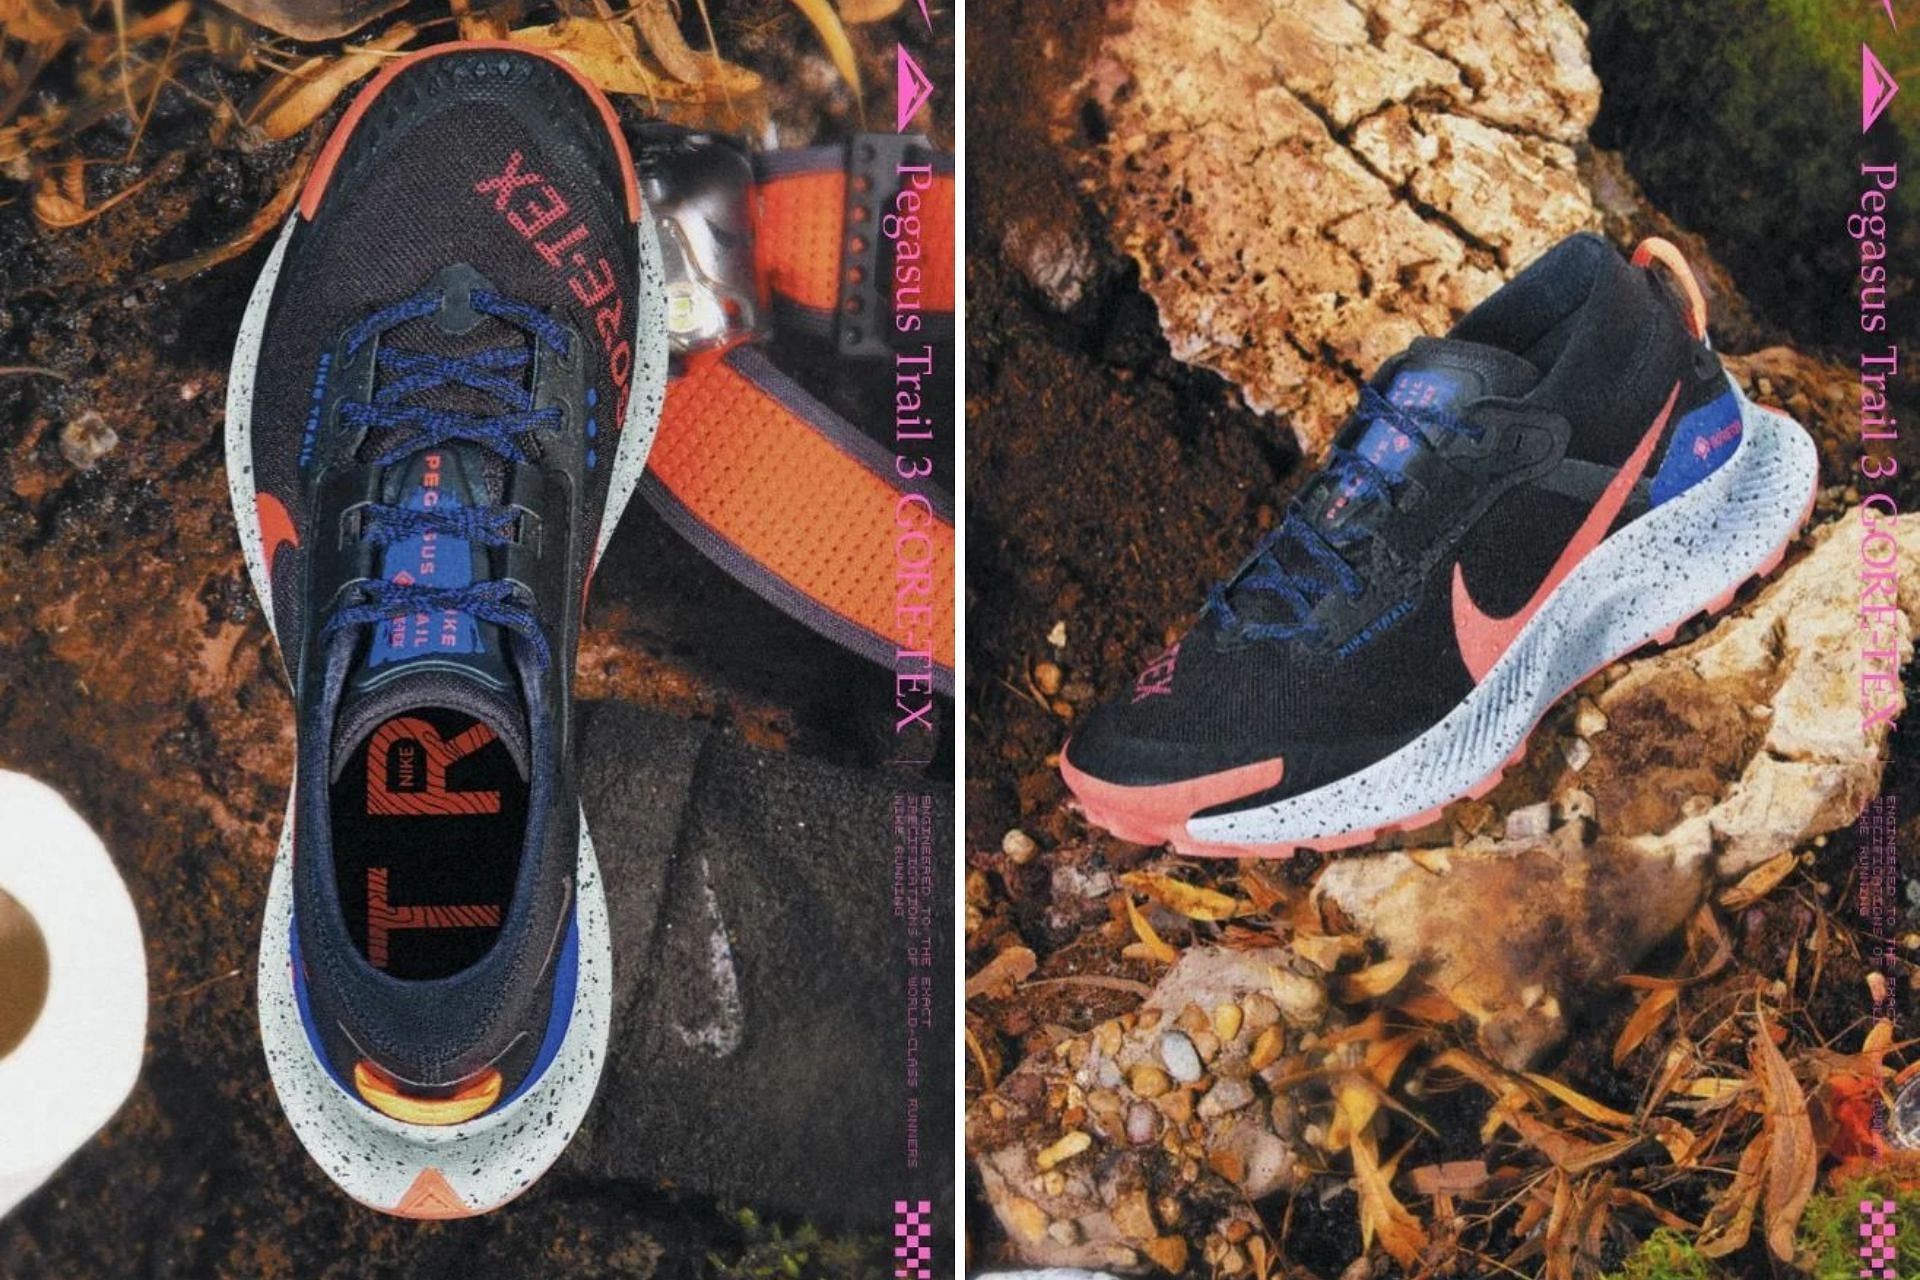 Here&#039;s a detailed look at the Pegasus Trial 3 GORE-TEX shoes (Image via Nike.com)